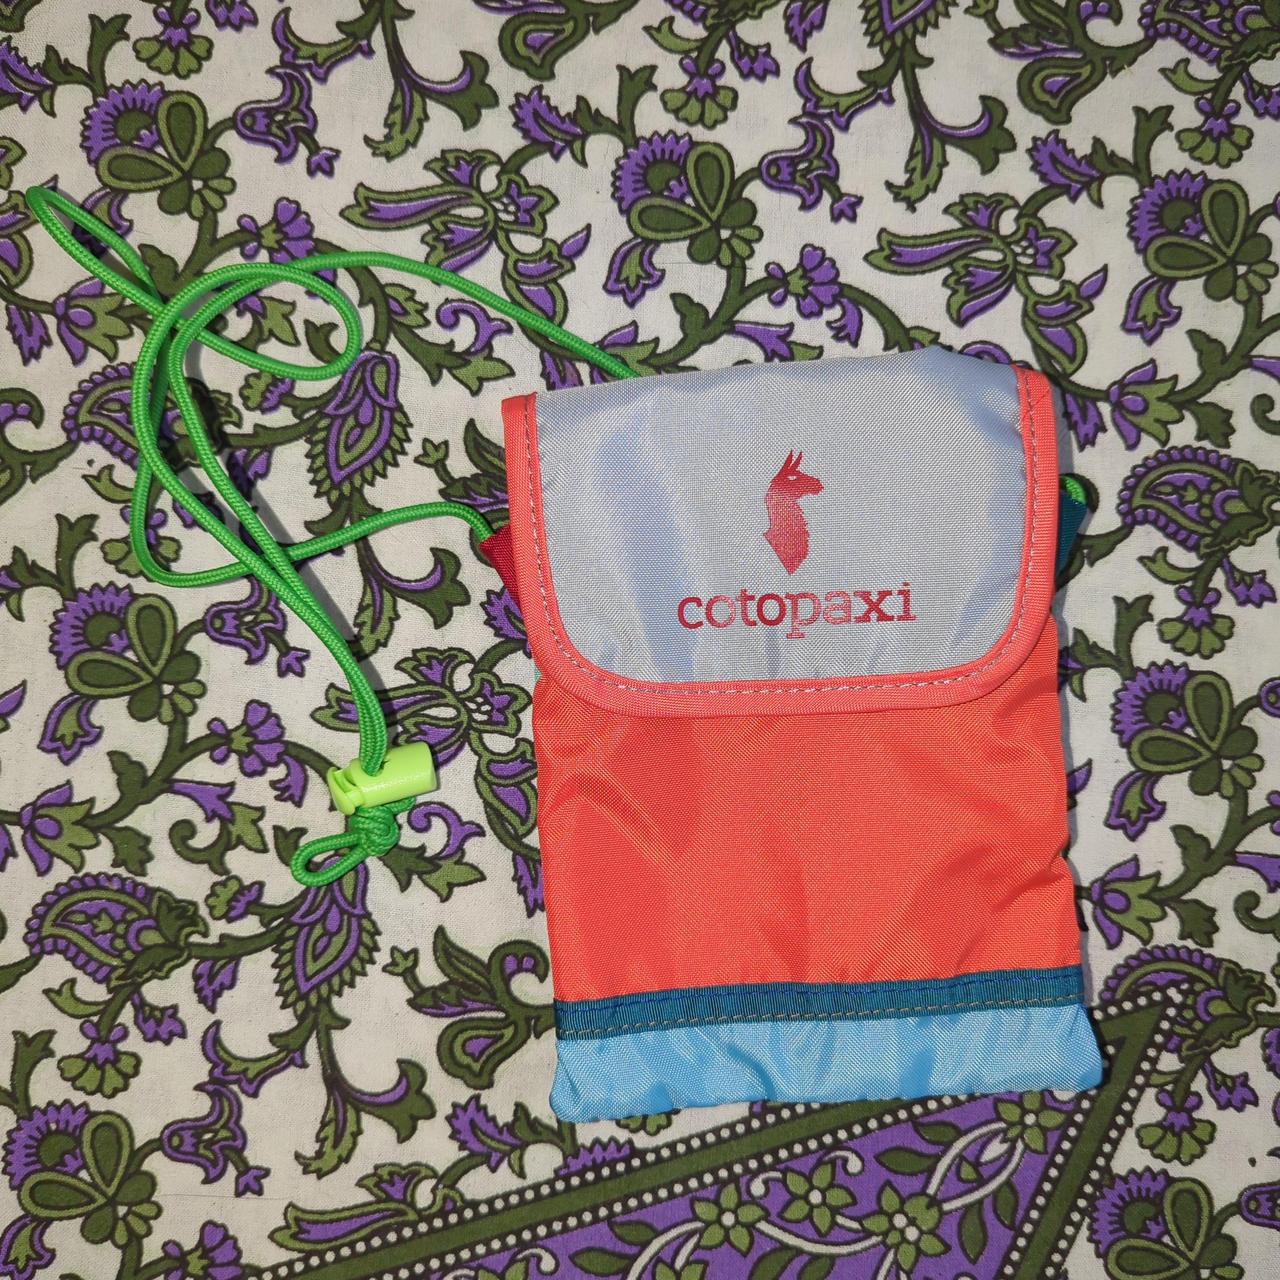 Cotopaxi cross body bag (perfect size for a phone) - Depop